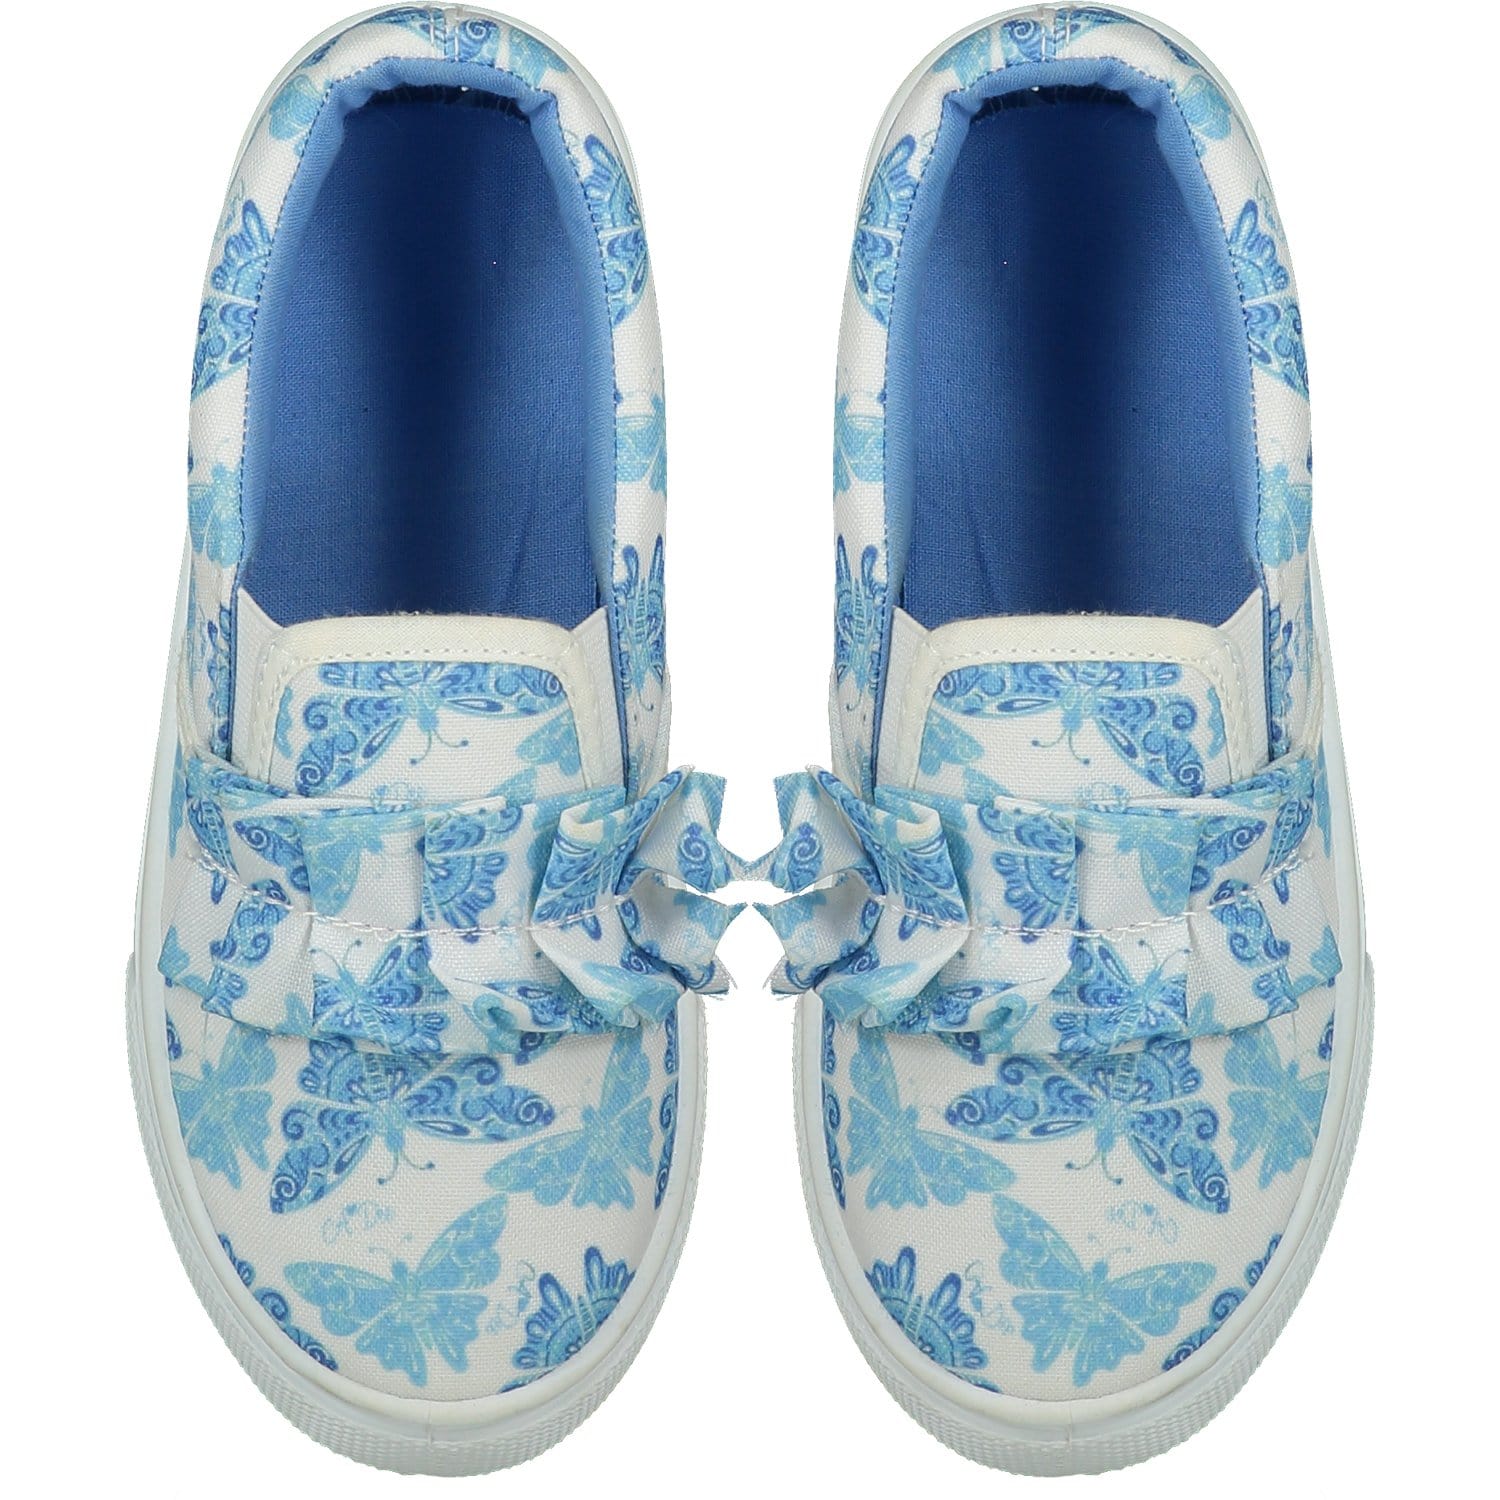 A DEE - Frilly Canvas Slip On Trainer - Light Blue